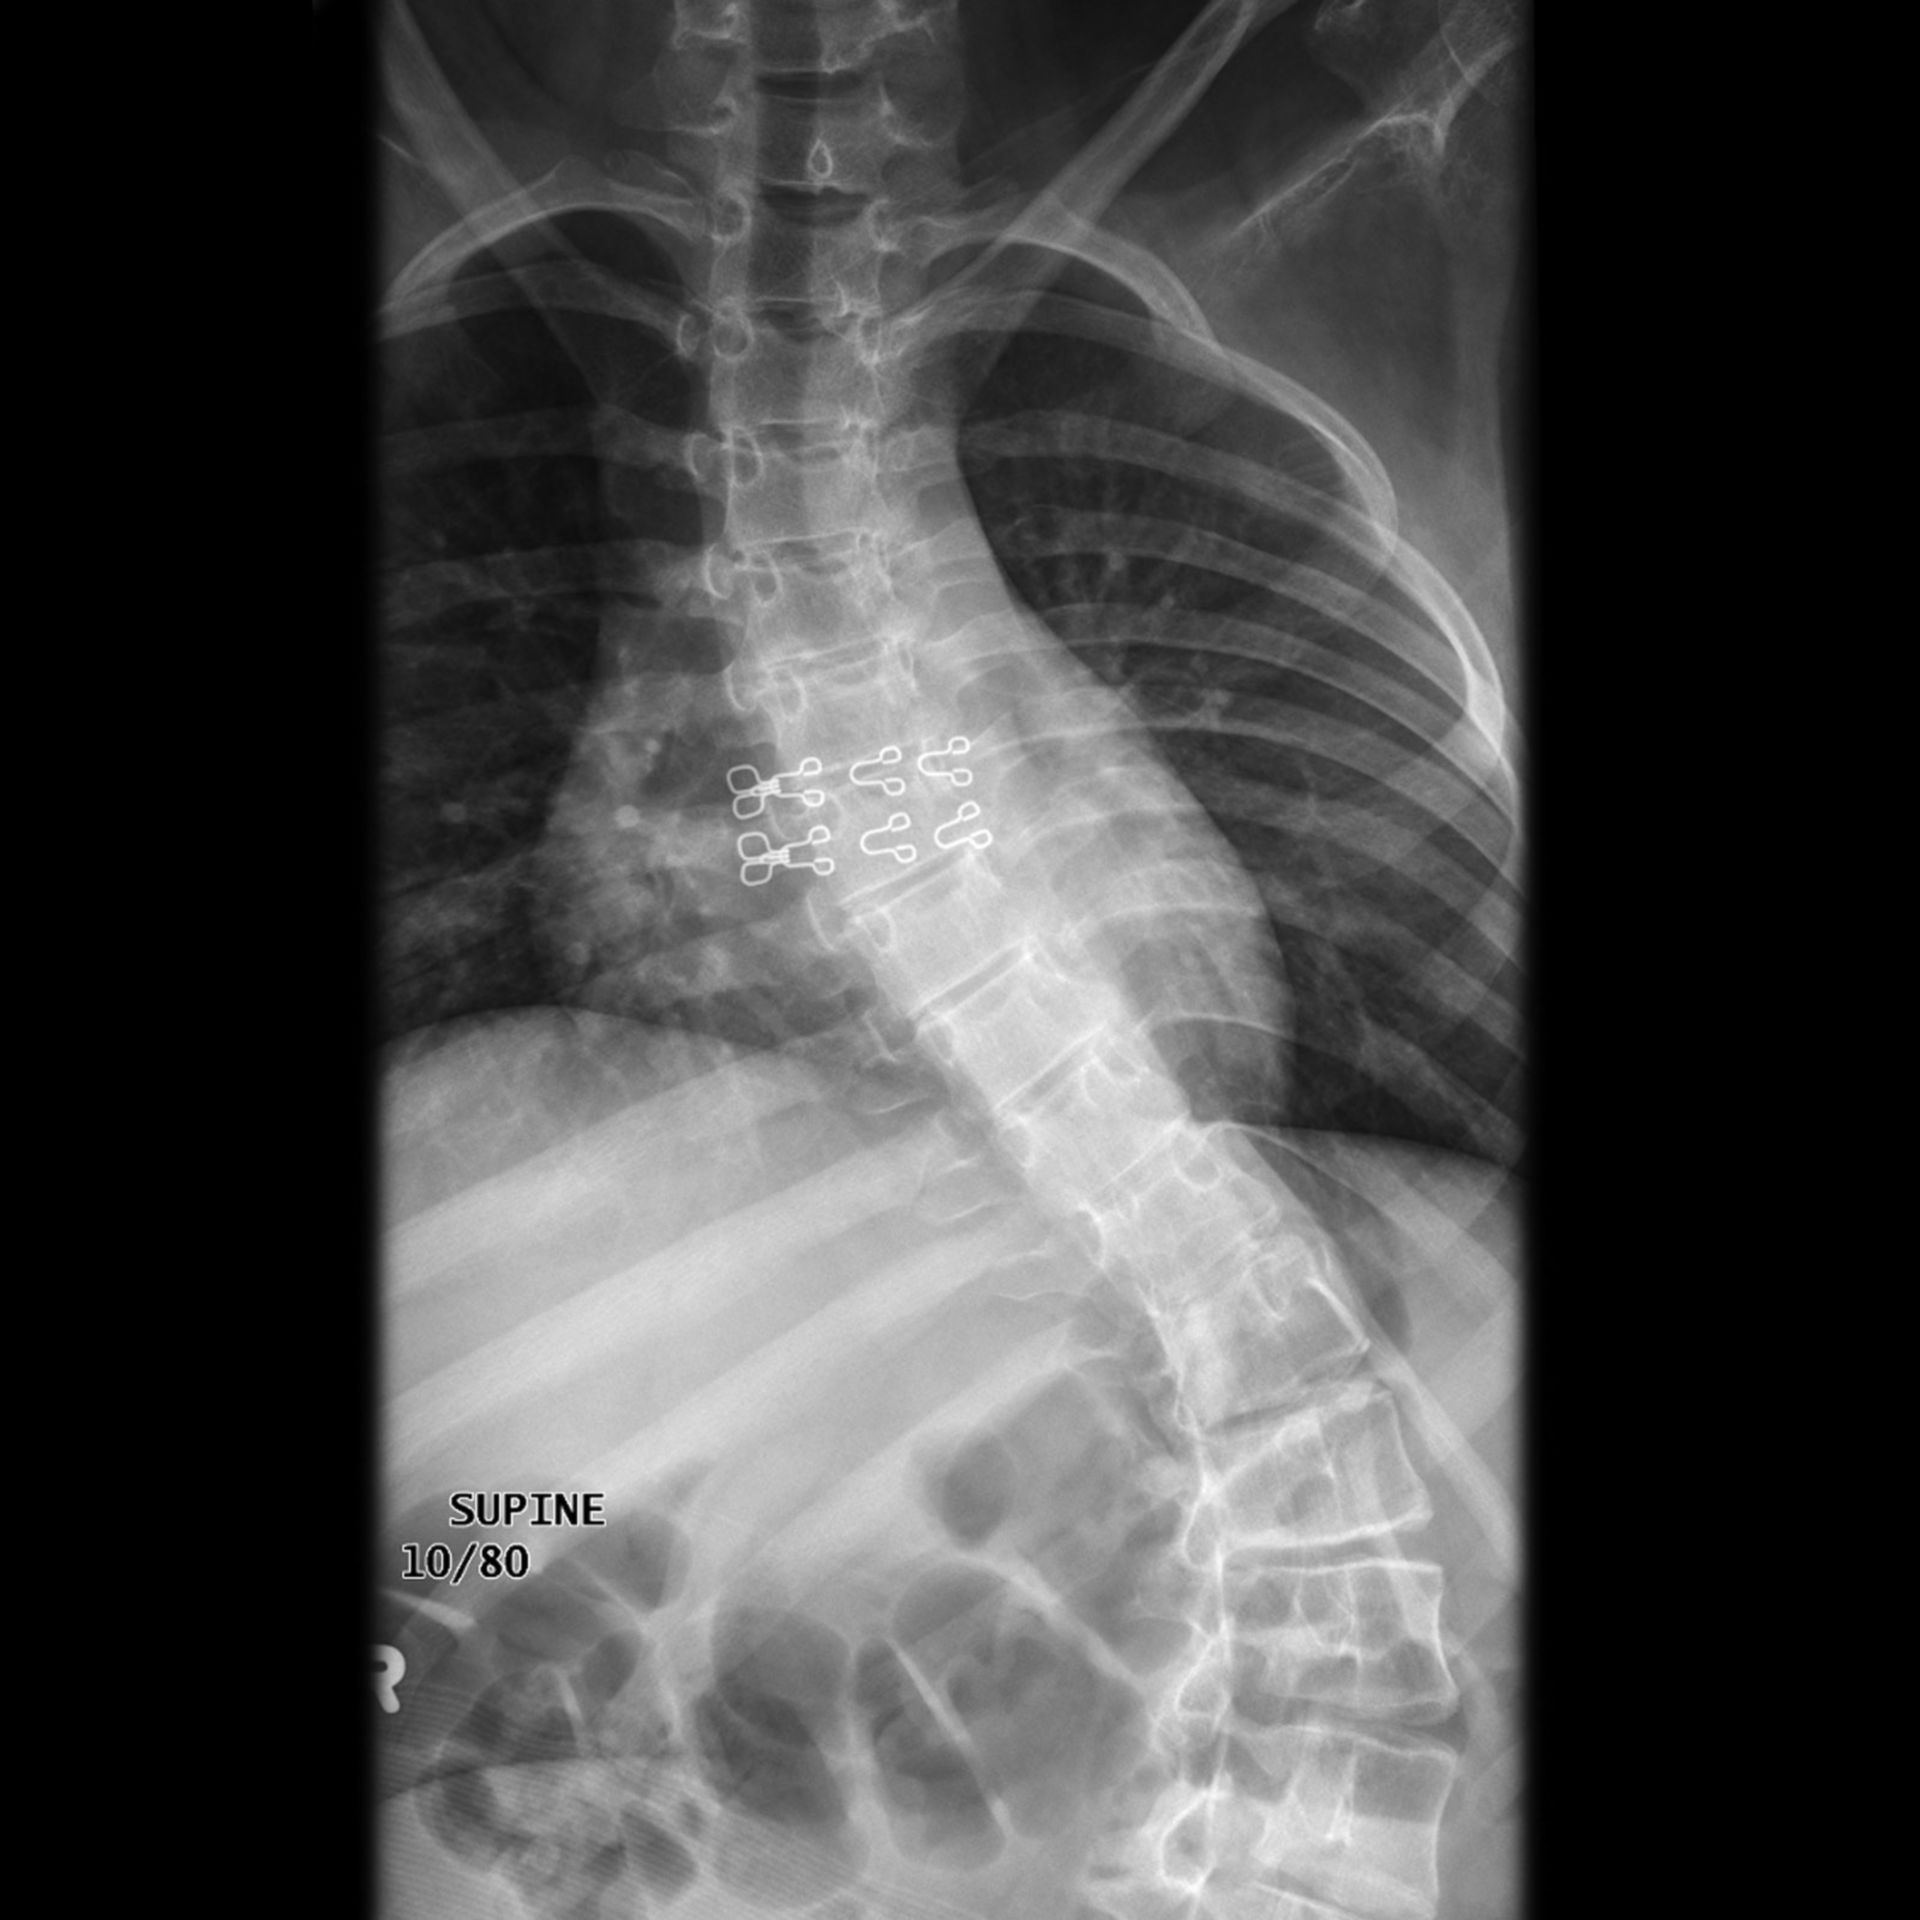 Spinal muscular atrophy (SMA) type II with scoliosis